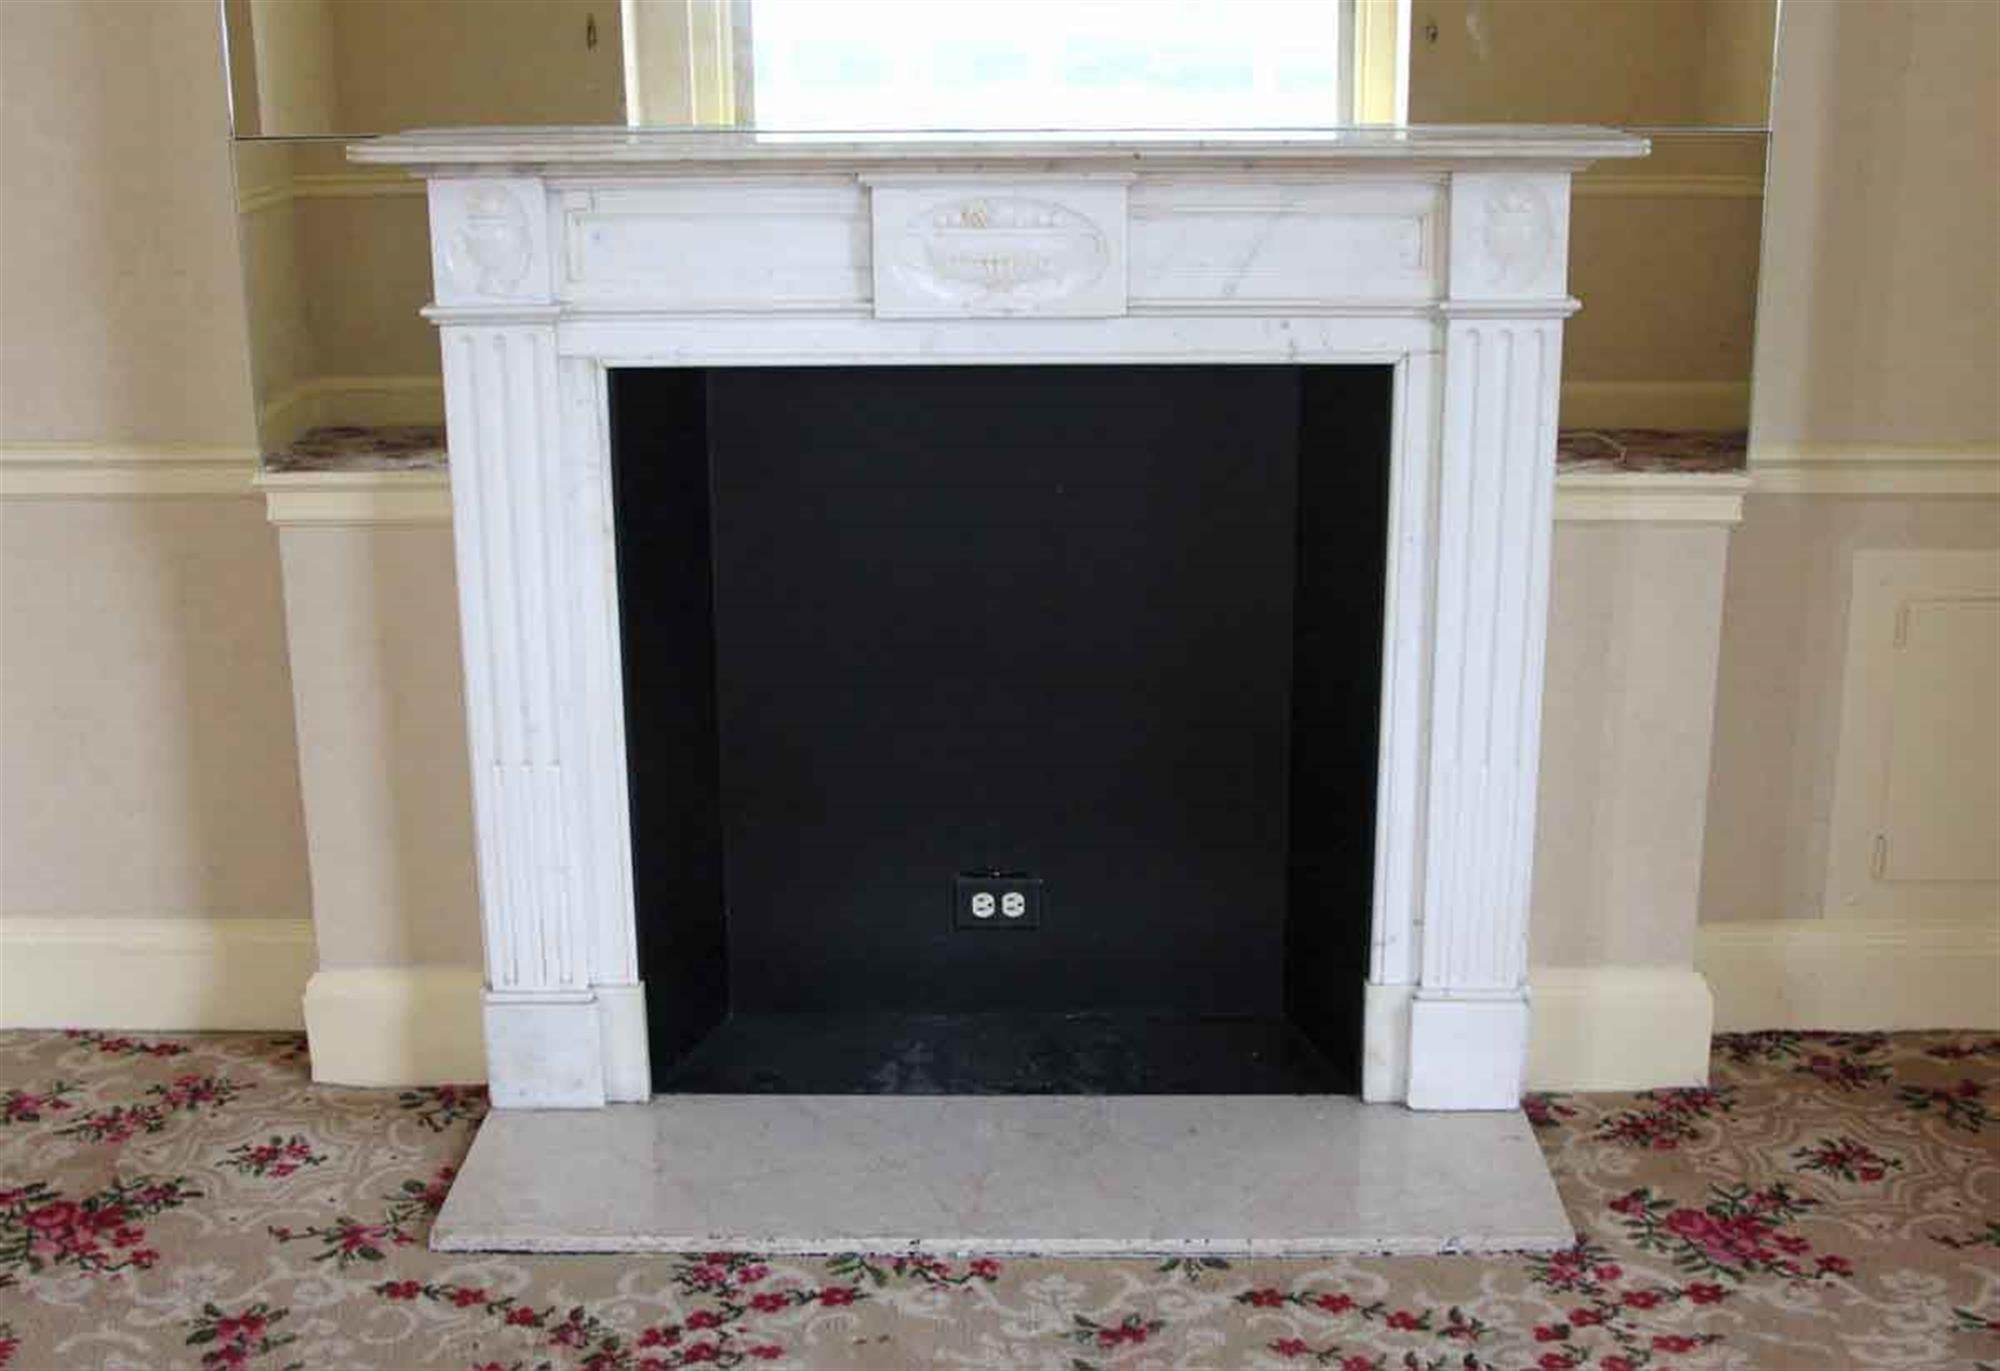 English Regency white statuary and Carrara marble mantel with urn details, circa 1910. This mantel was one of a group of antique mantels imported from Europe and installed in the NYC Waldorf Astoria hotel in the 1930s when the hotel was first built